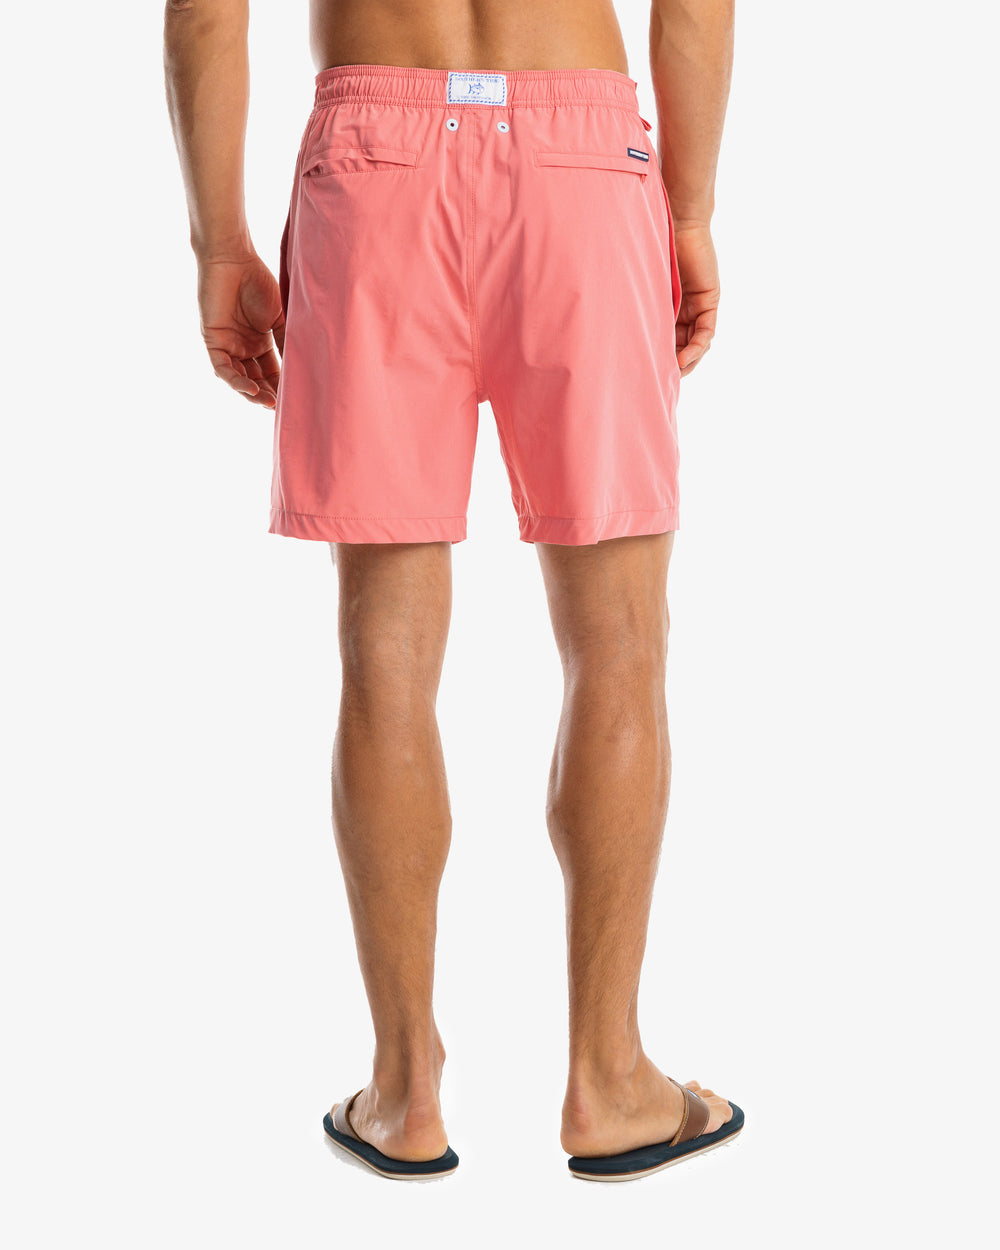 The model back view of the Men's Solid Swim Trunk by Southern Tide - Rouge Red